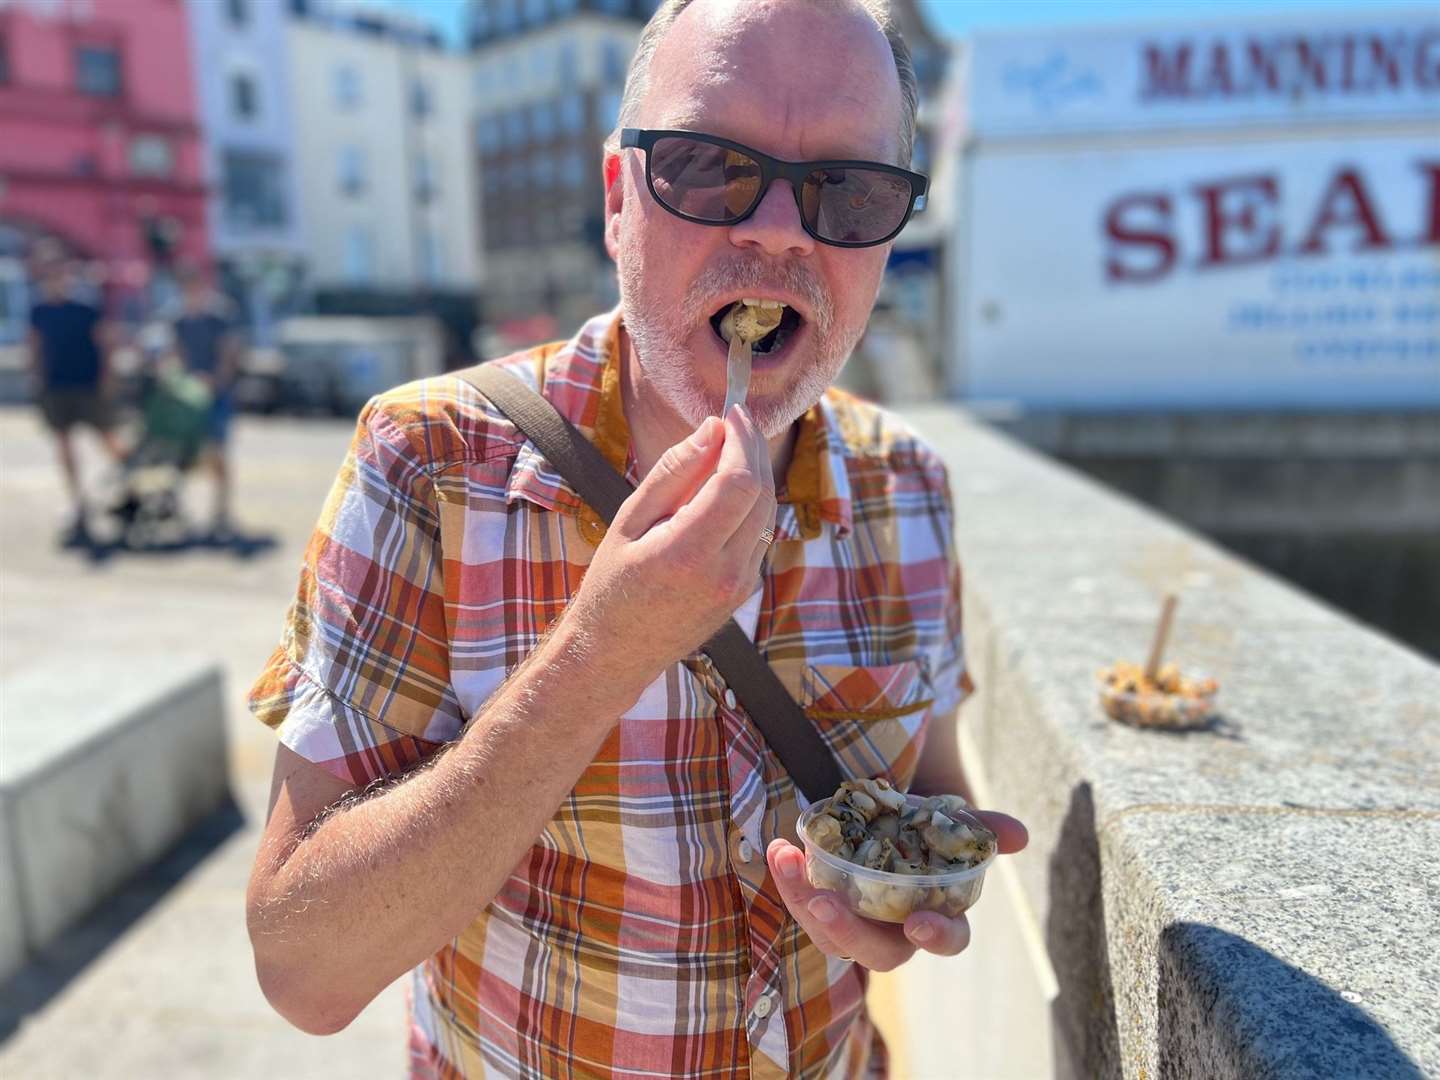 Your reporter gobbles down a whelk in a, frankly, questionable shirt